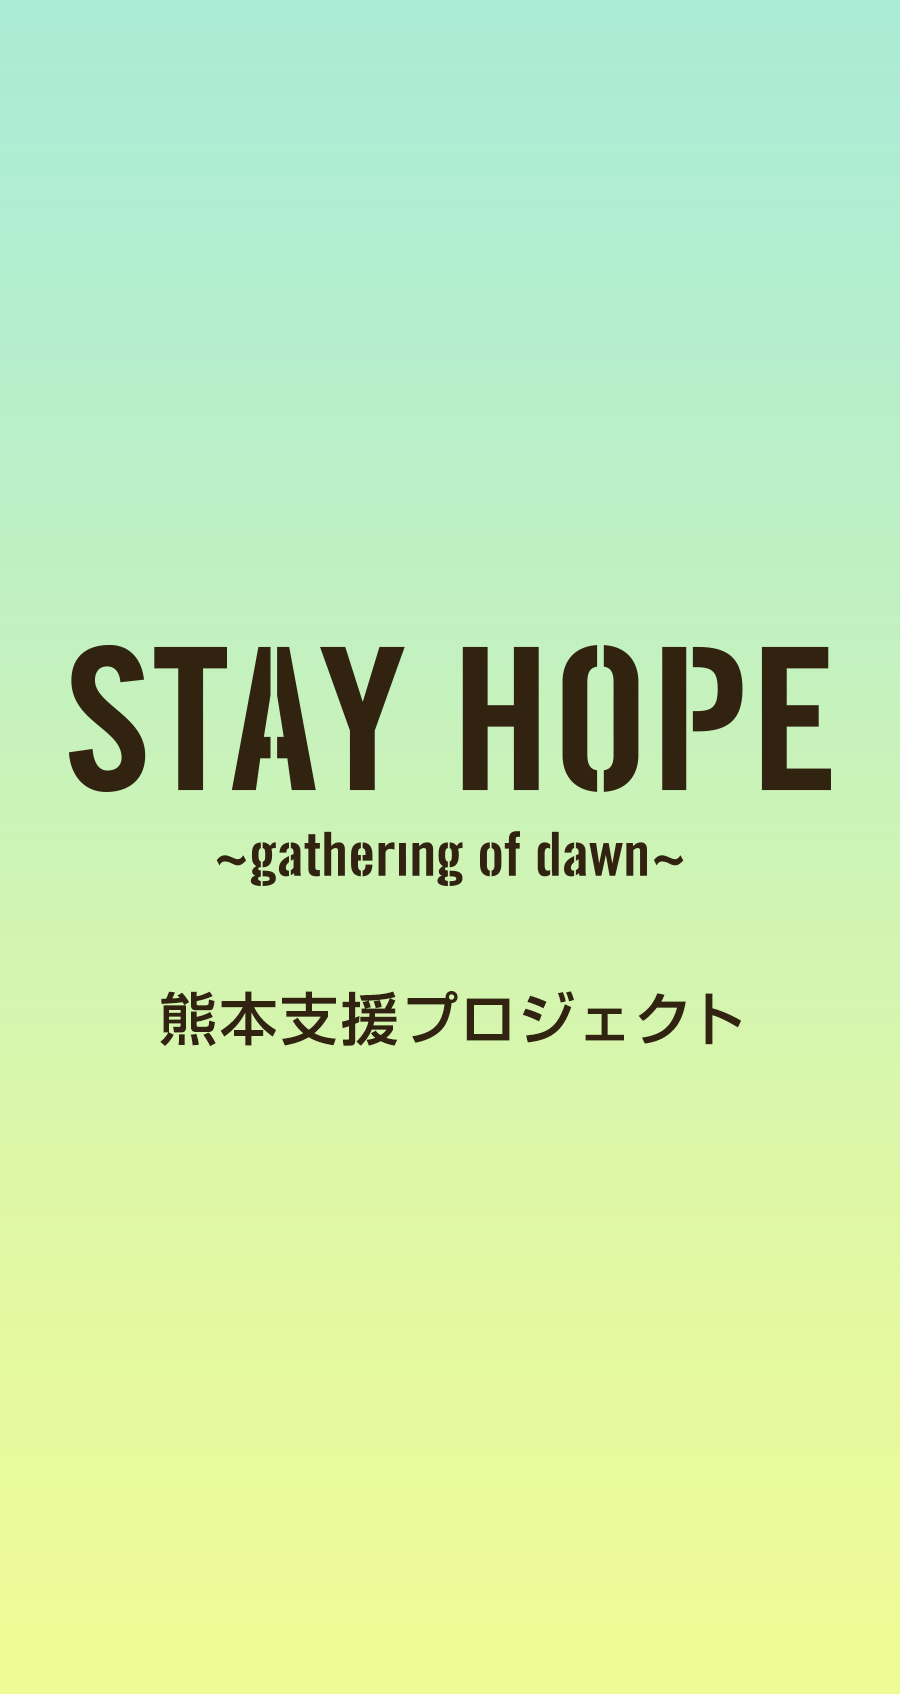 STAY HOPE ～gathering of dawn～ 熊本支援プロジェクト